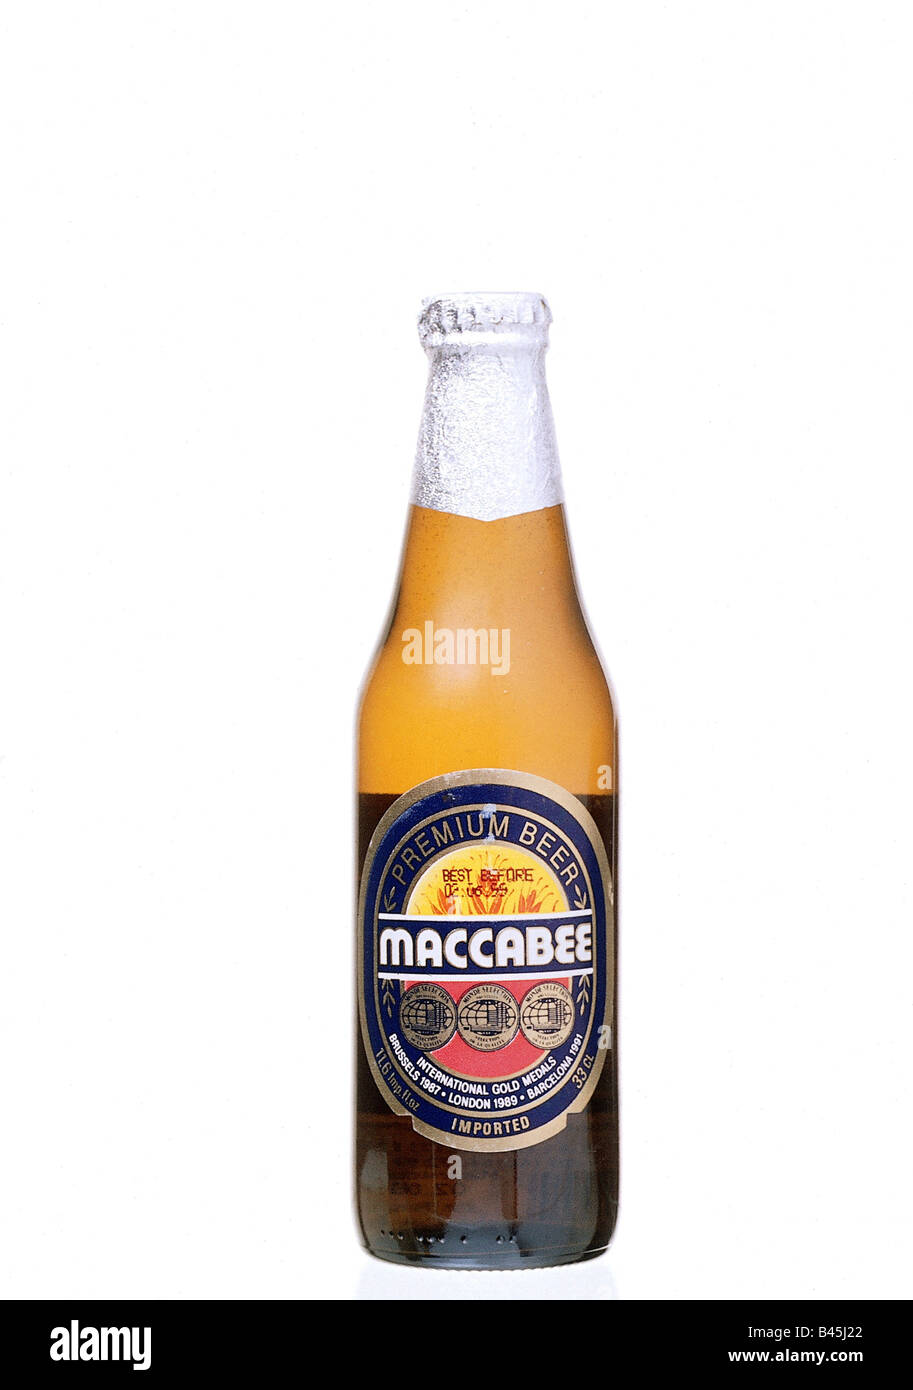 food and beverages, alcohol, beer, bottle 'Maccabee Premium Beer', Tempo Beer Industries, Israel, bottles, Additional-Rights-Clearance-Info-Not-Available Stock Photo